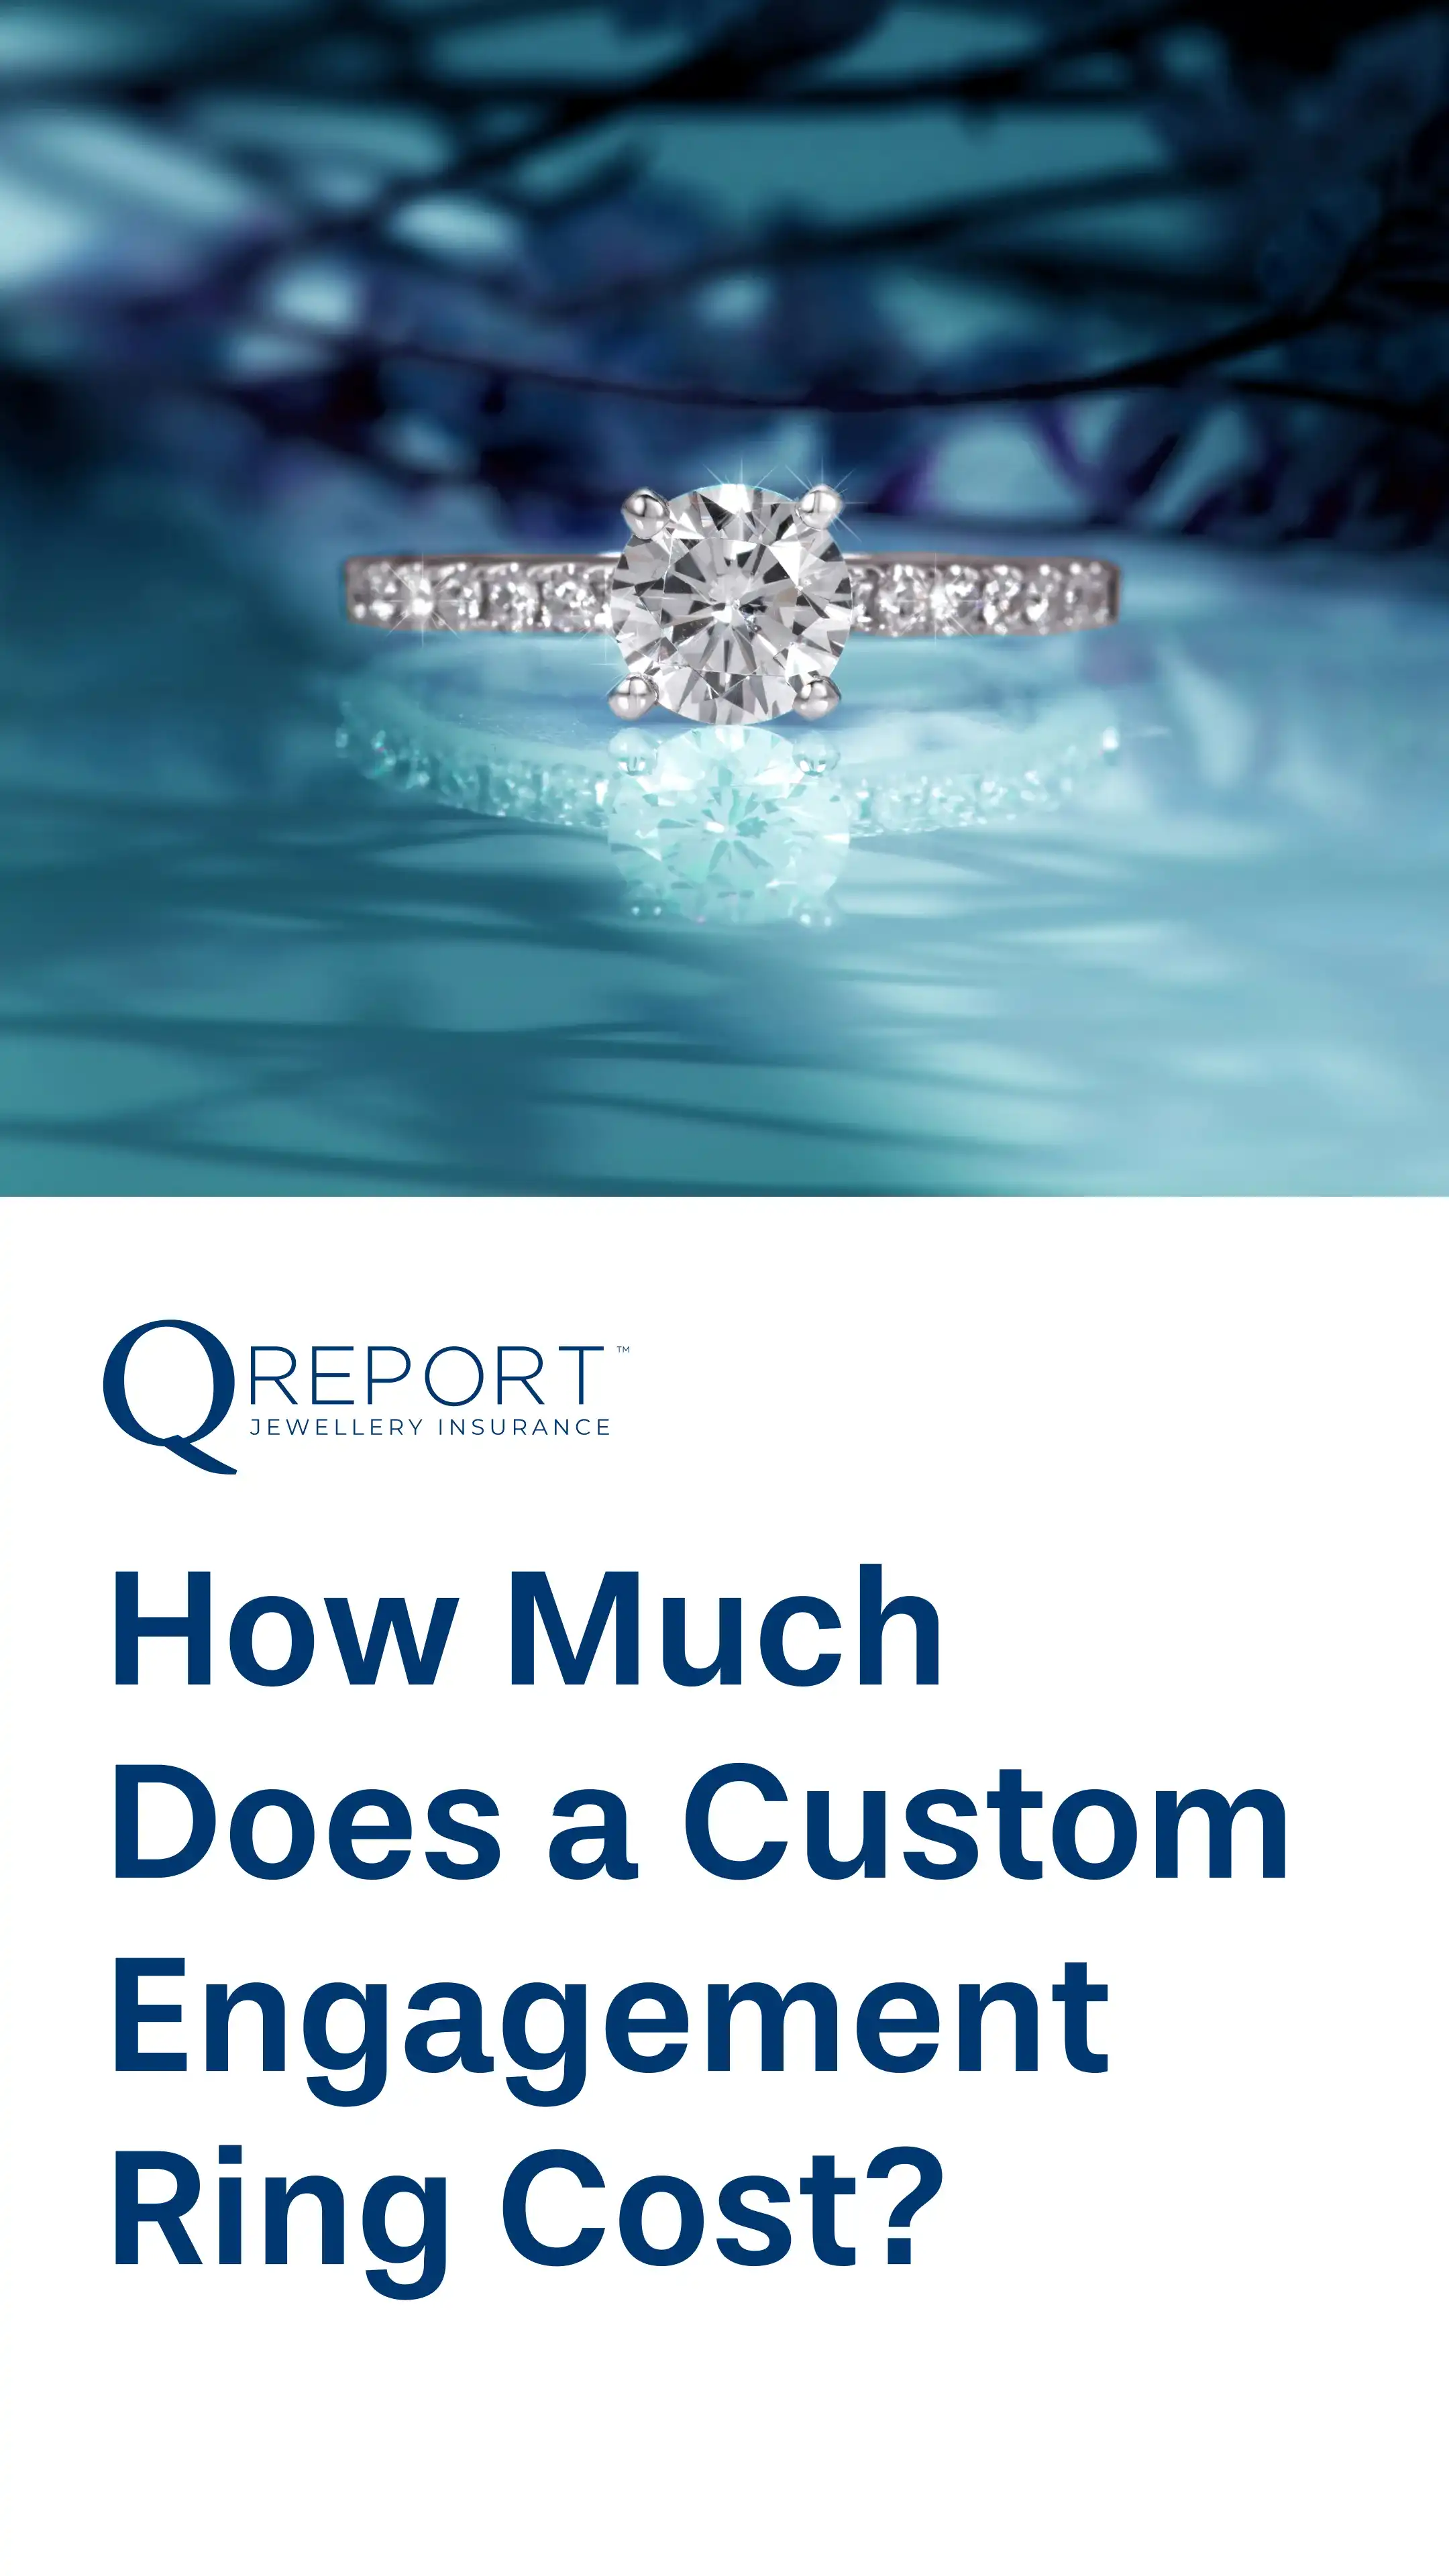 How Much Does a Custom Engagement Ring Cost?